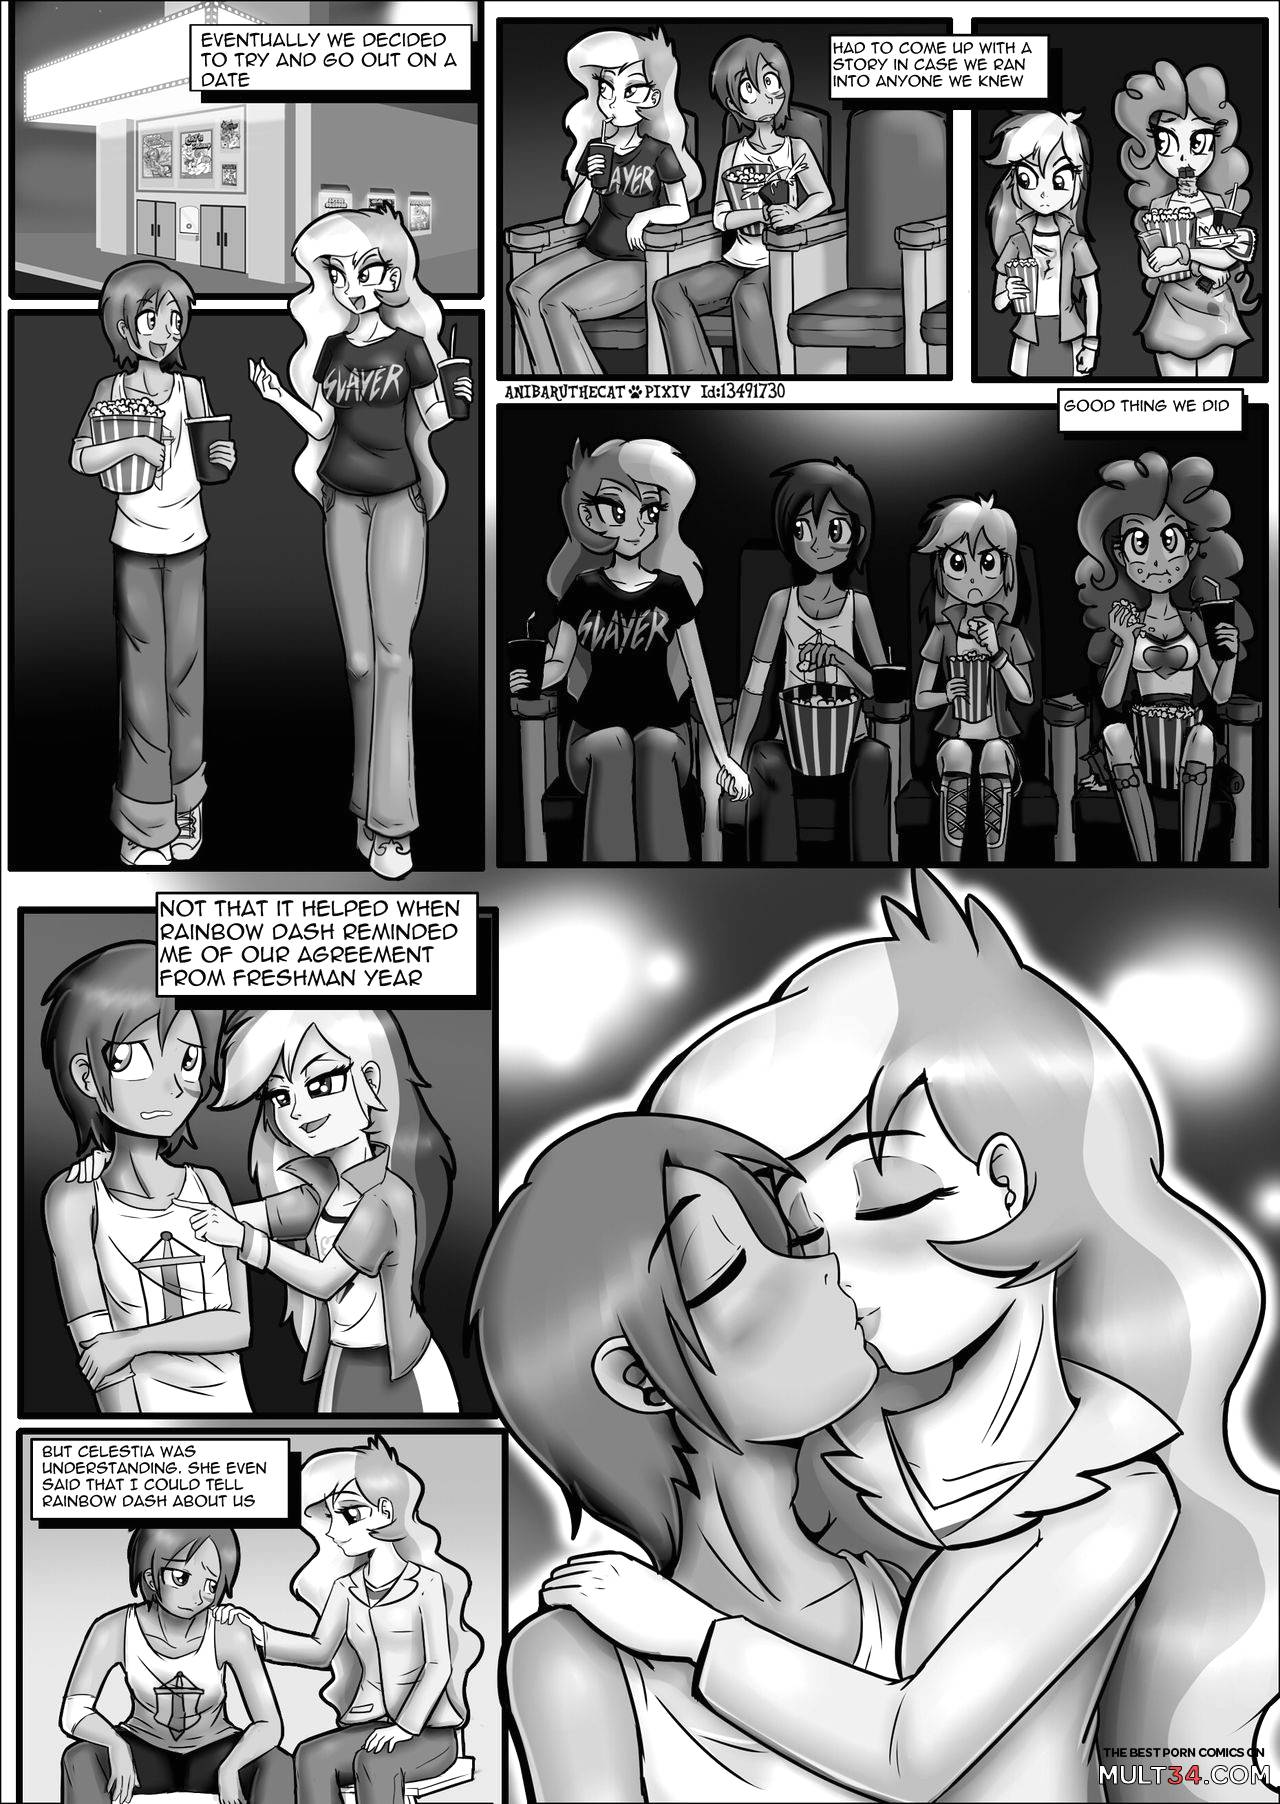 Boys will be Boys page 13